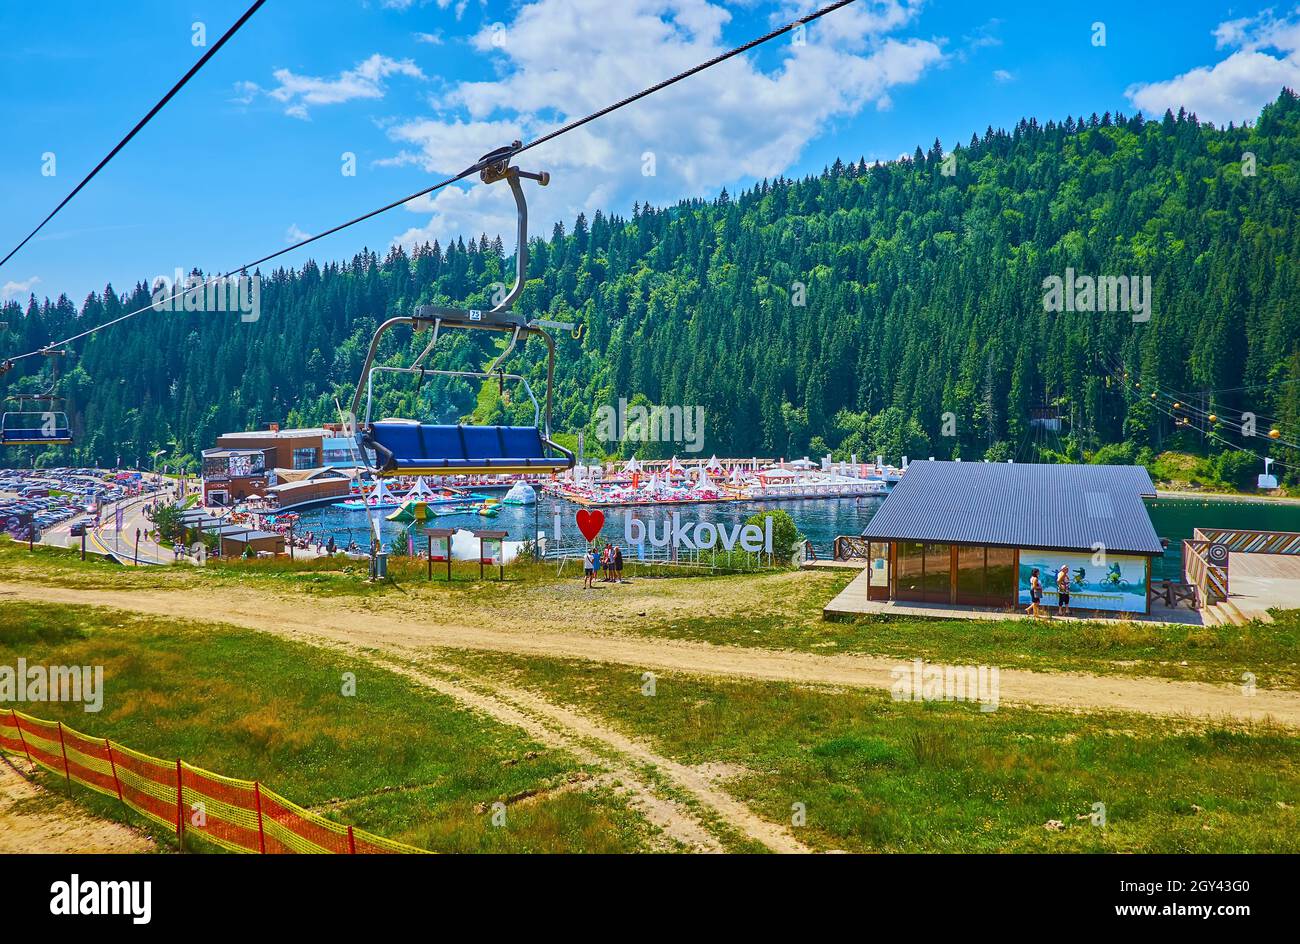 BUKOVEL, UKRAINE - JULY 25, 2021: The mountain Molodist (Youth) Lake with beach, spa club, water attractions and green mountains of Gorgany Range in t Stock Photo